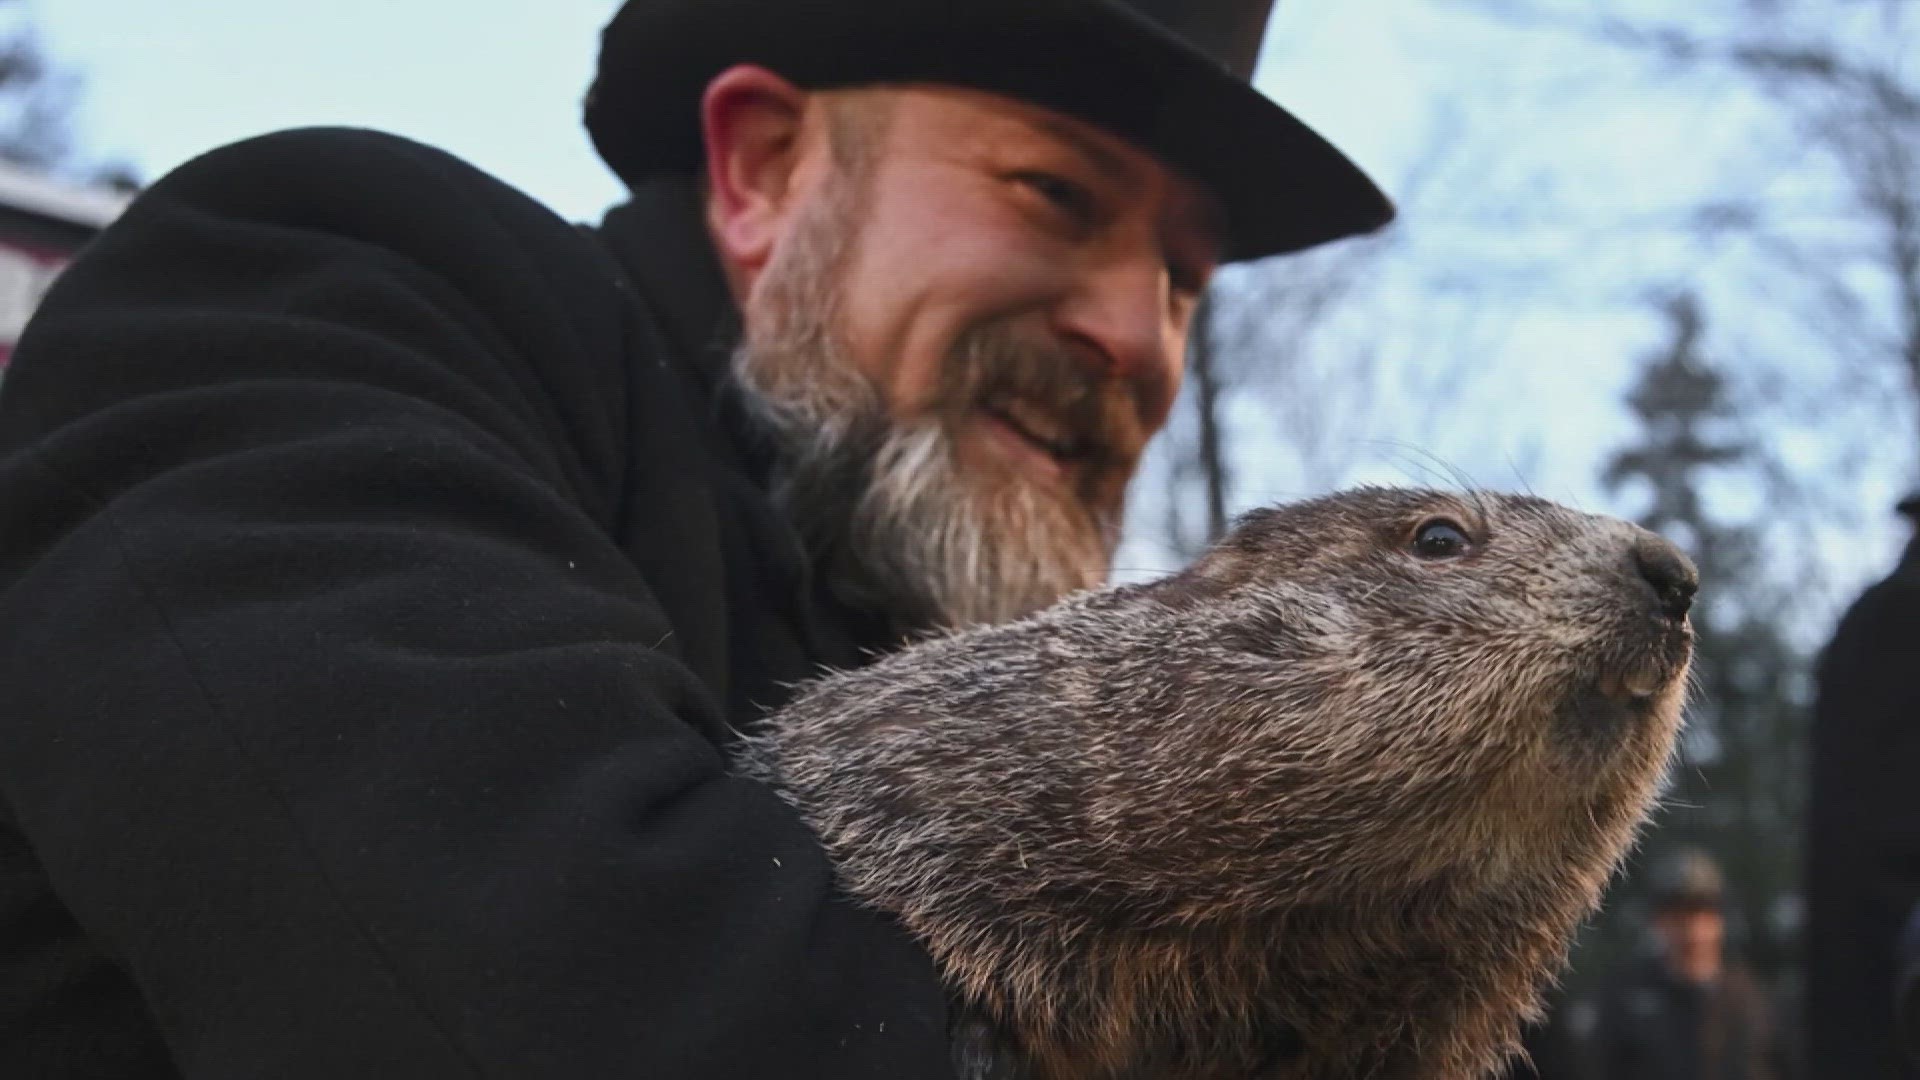 Punxsutawney Phil emerged from his home Friday morning, and let the world know they can expect an early spring!